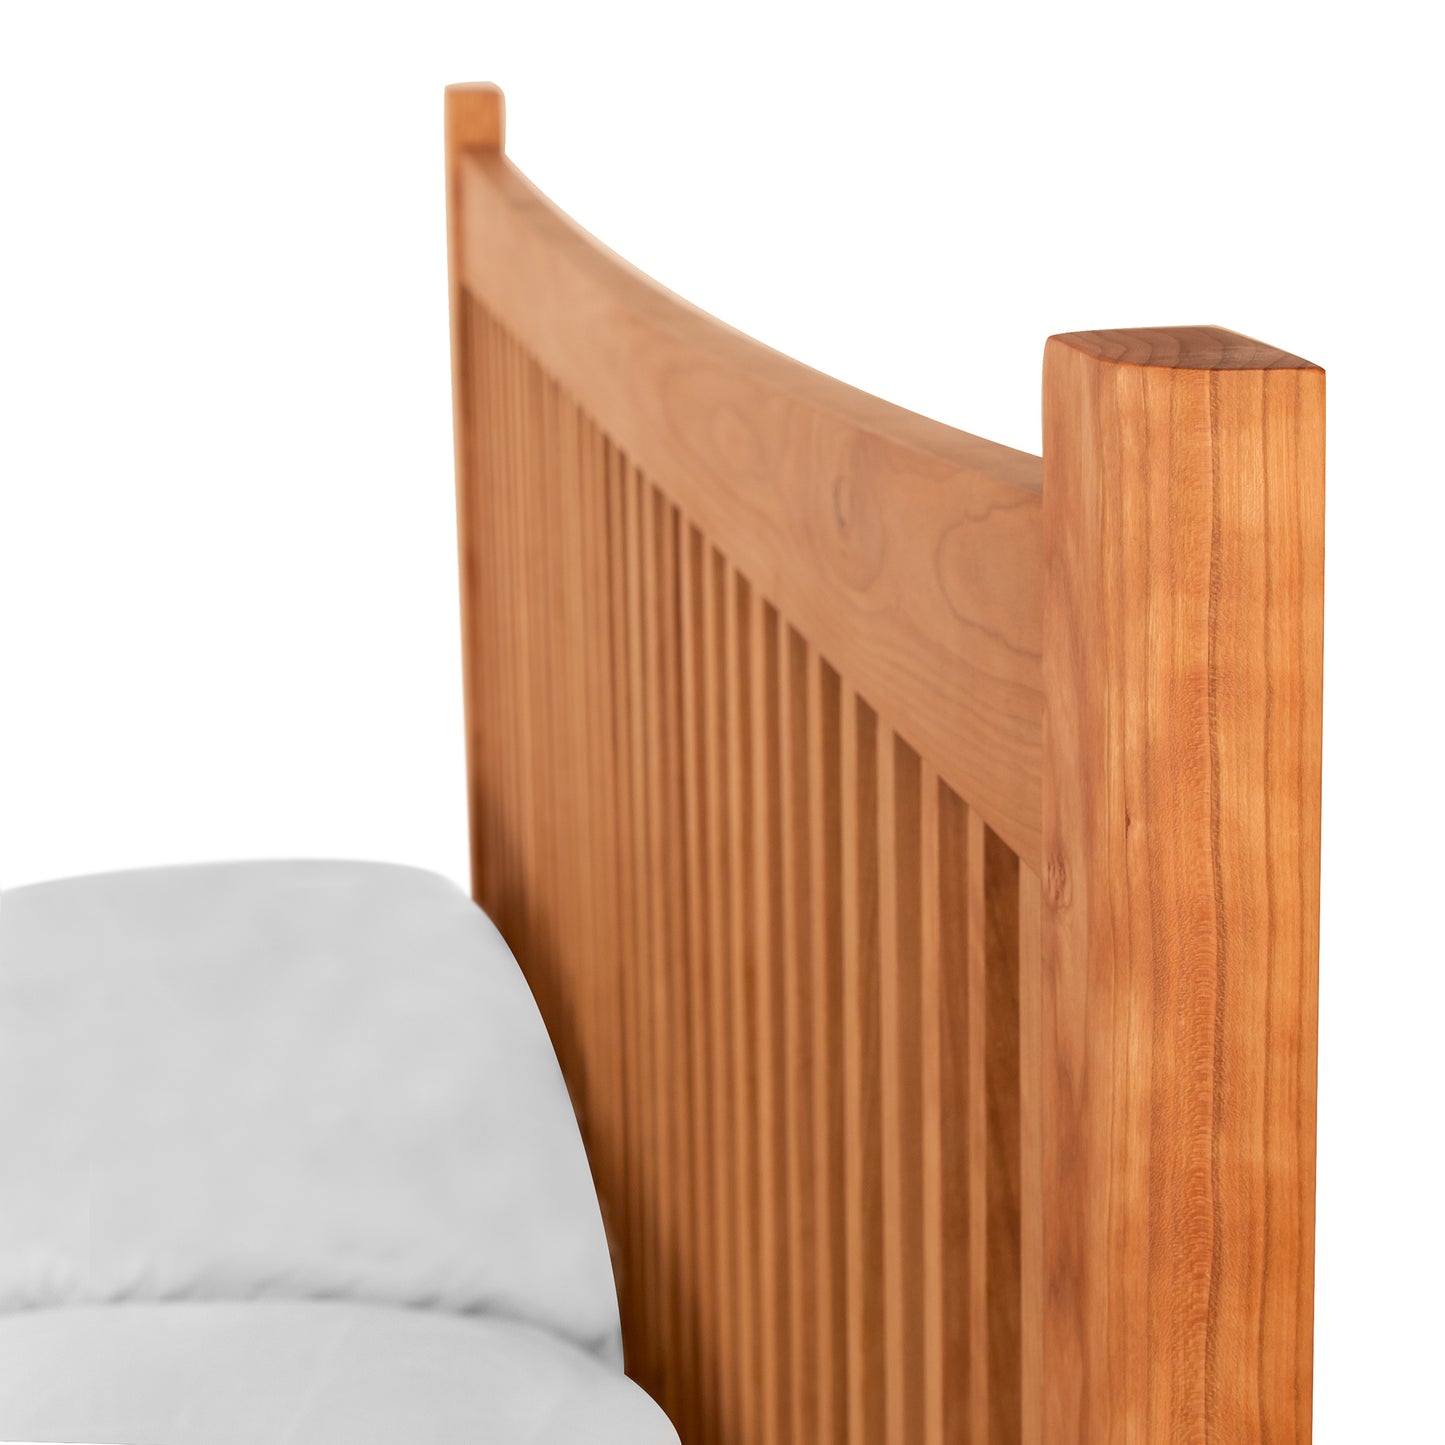 Arts and Crafts styling Heartwood Shaker Low Footboard Bed with vertical slats adjacent to a white mattress on a white background.